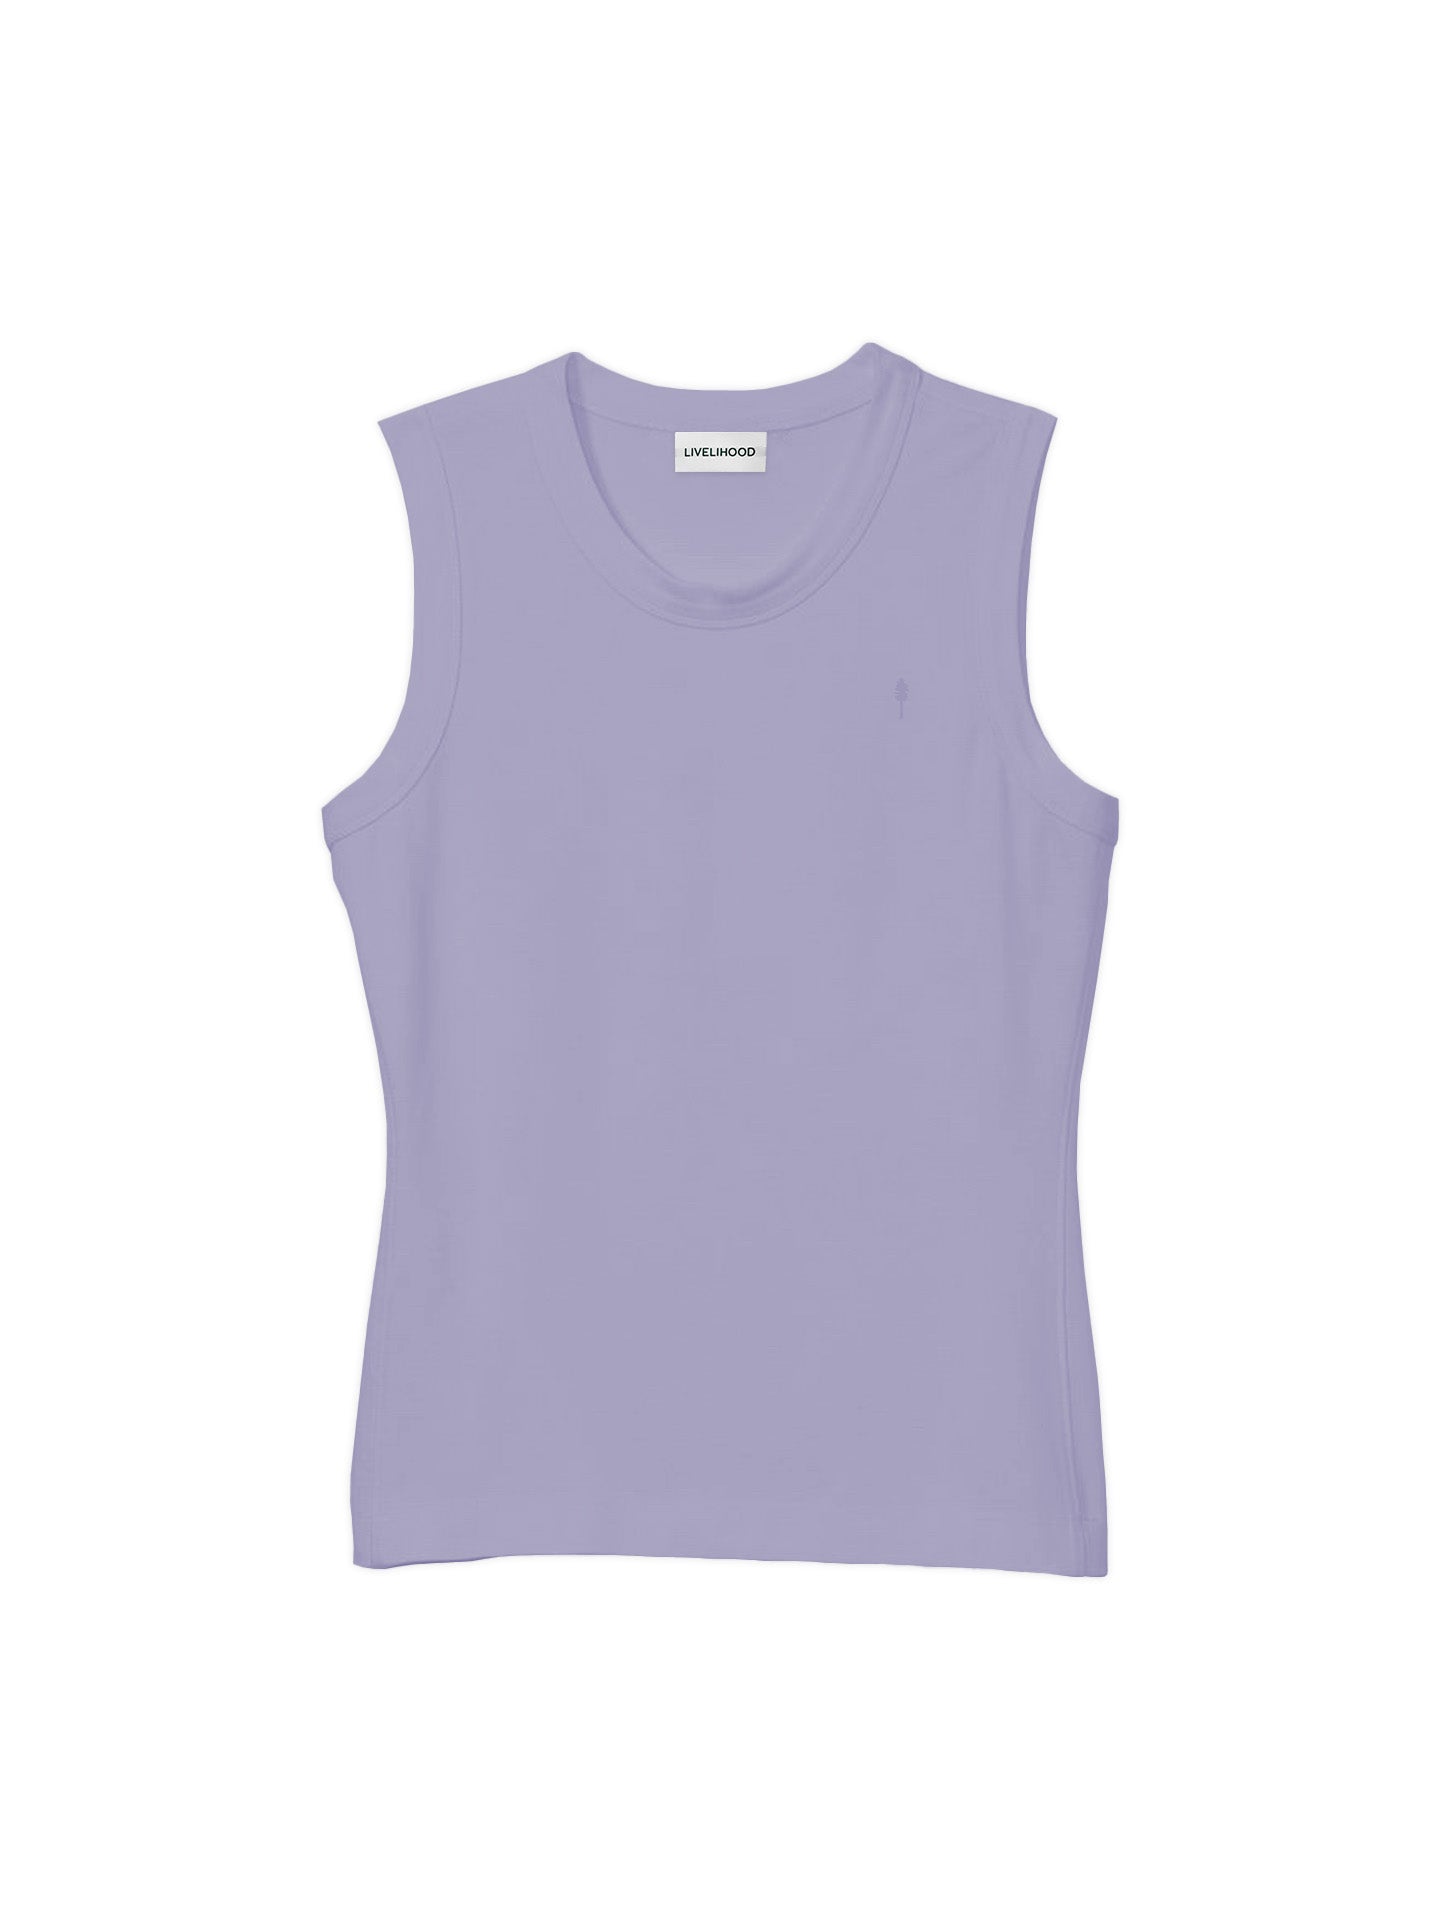 The Tank Top - Lavender